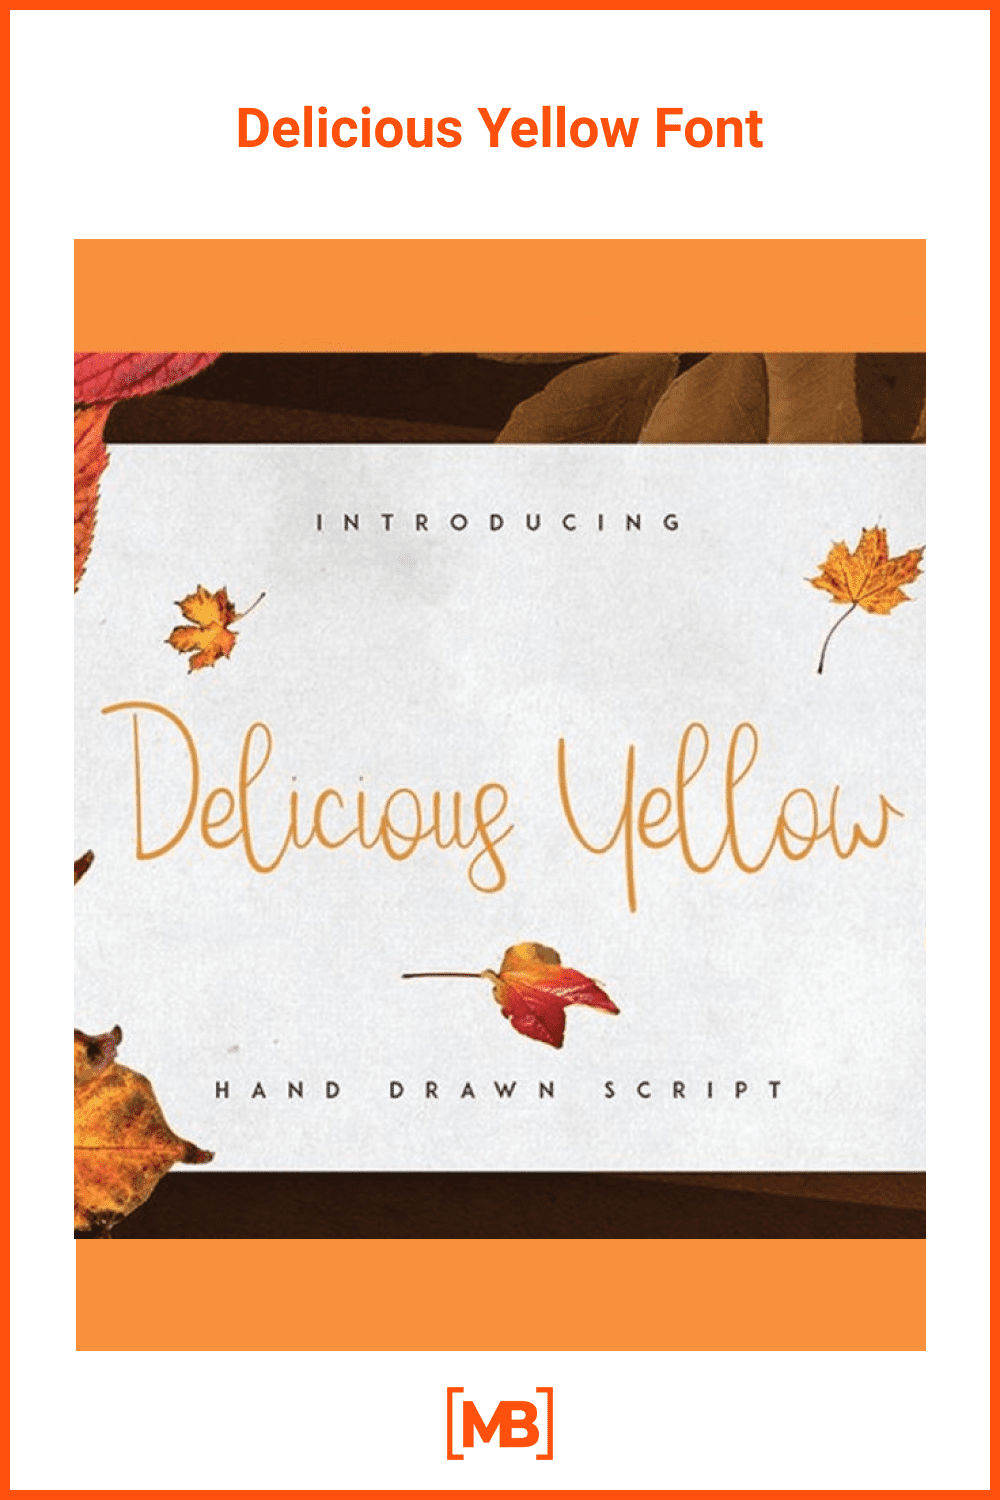 Delicious Yellow Font.